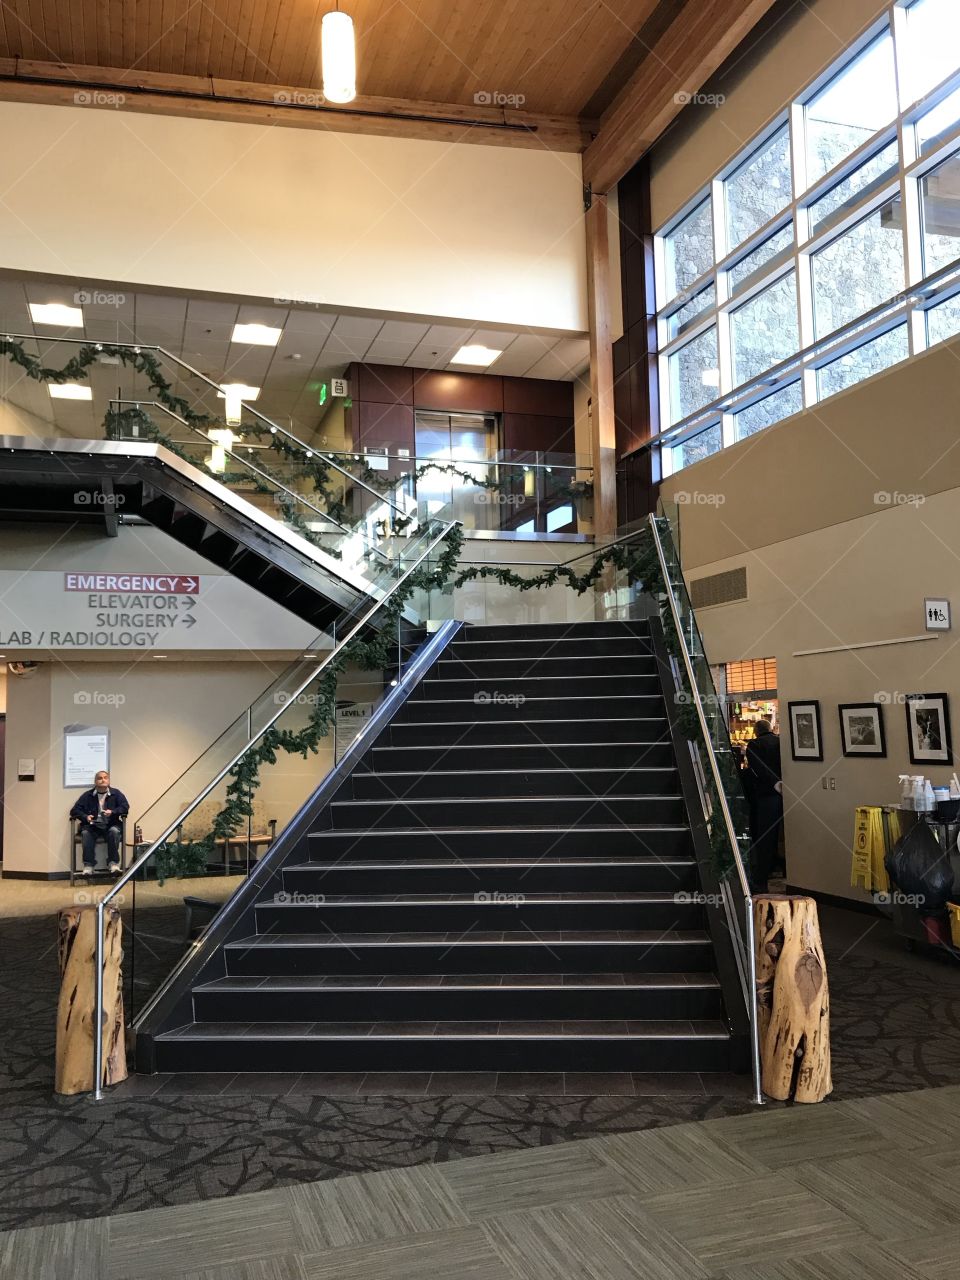 Two levels of stairs decorated with garland for the holiday season lead to an upper floor of a building. 